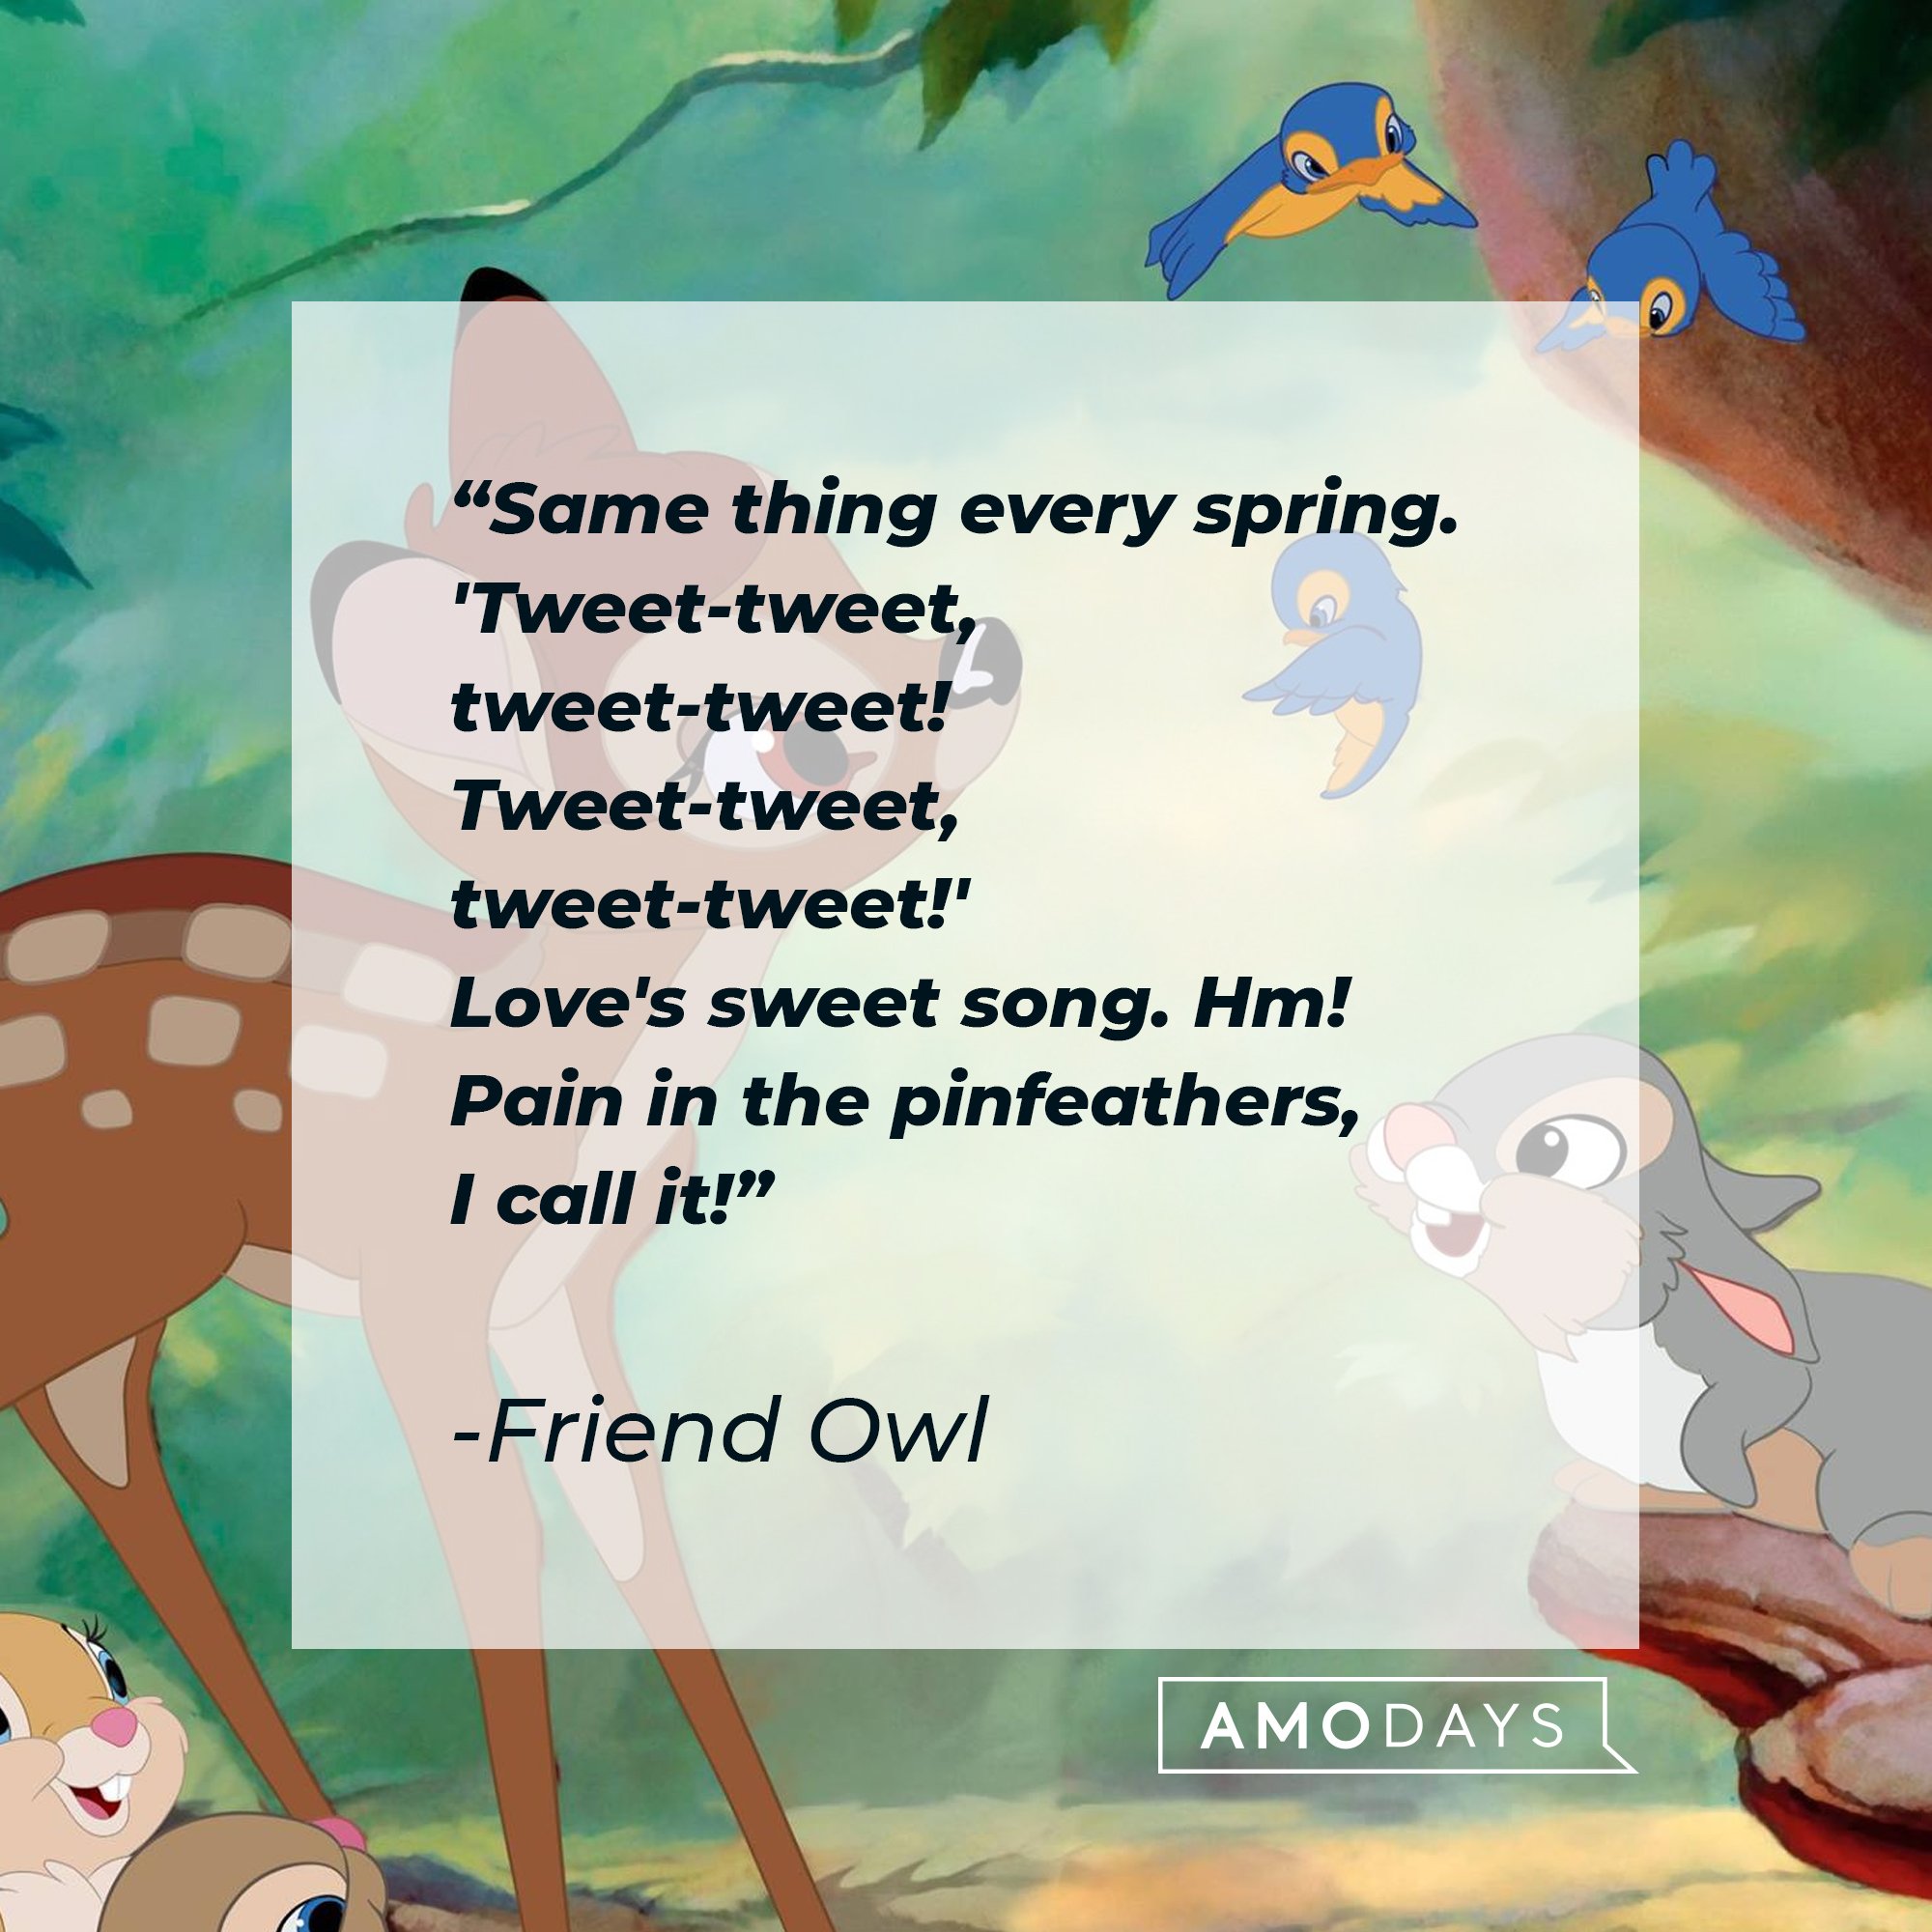 Friend Owl's quote "Same thing every spring. 'Tweet-tweet, tweet-tweet! Tweet-tweet, tweet-tweet!' Love's sweet song. Hm! Pain in the pinfeathers, I call it!" | Source: facebook.com/DisneyBambi